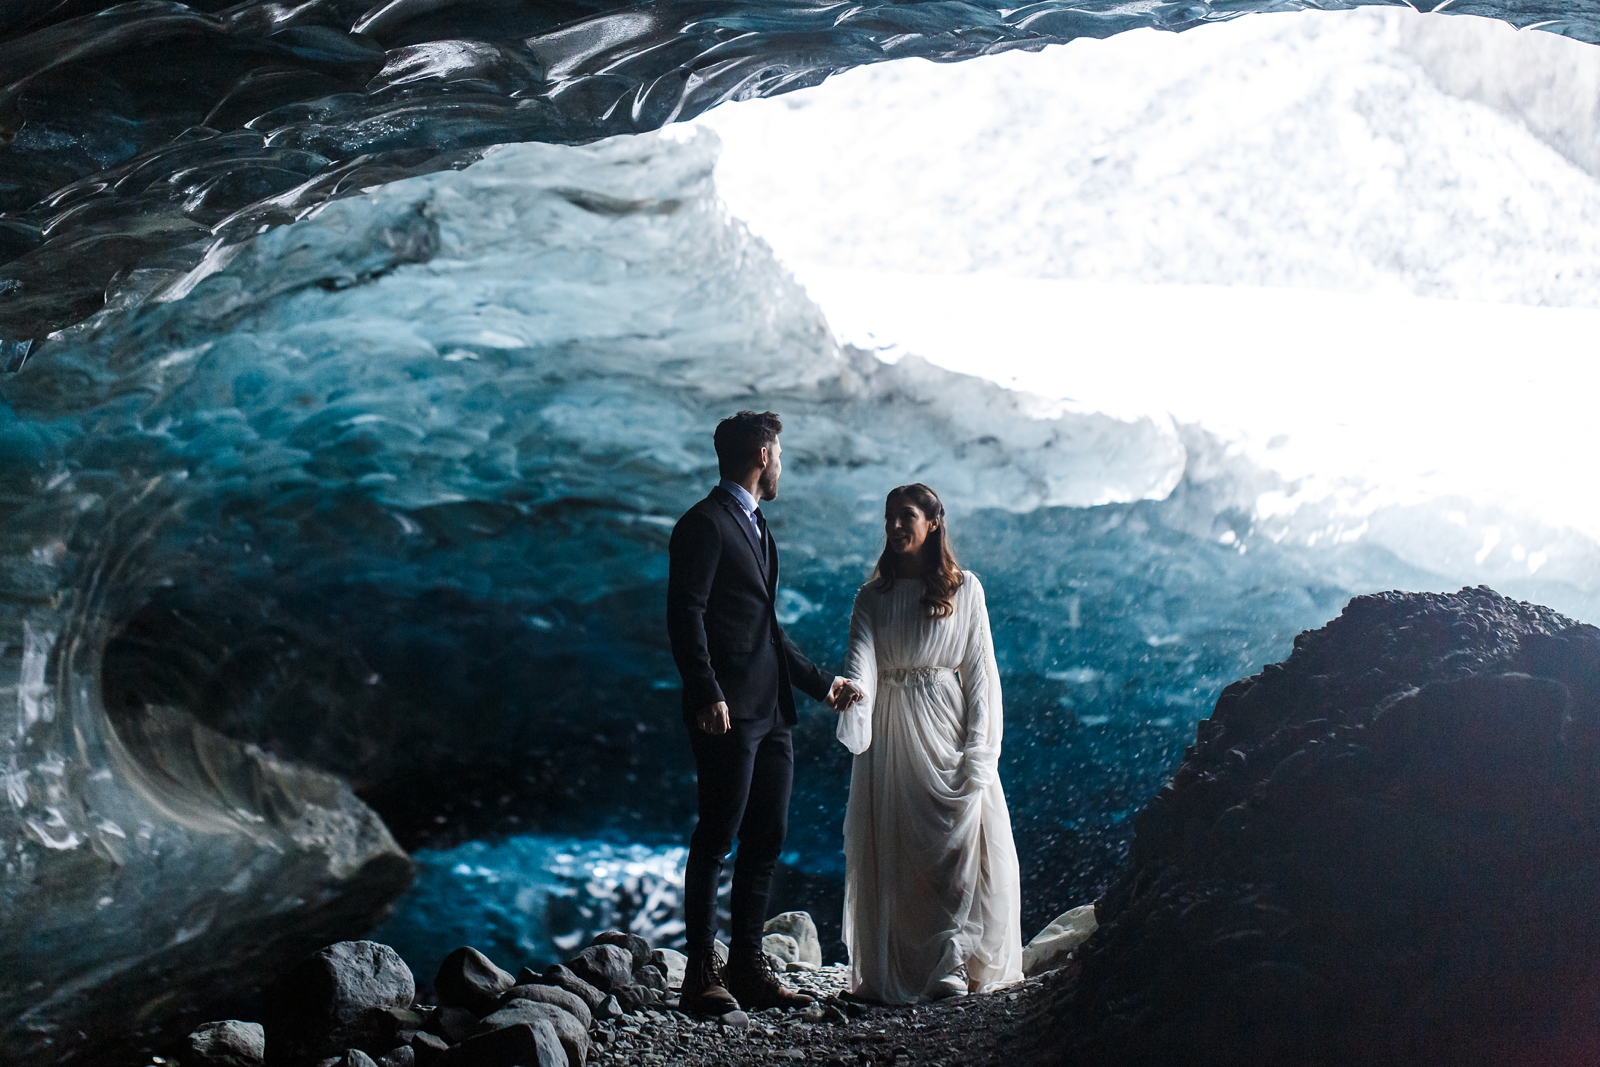 An eloping bride and groom in a beautiful Iceland glacier cave.